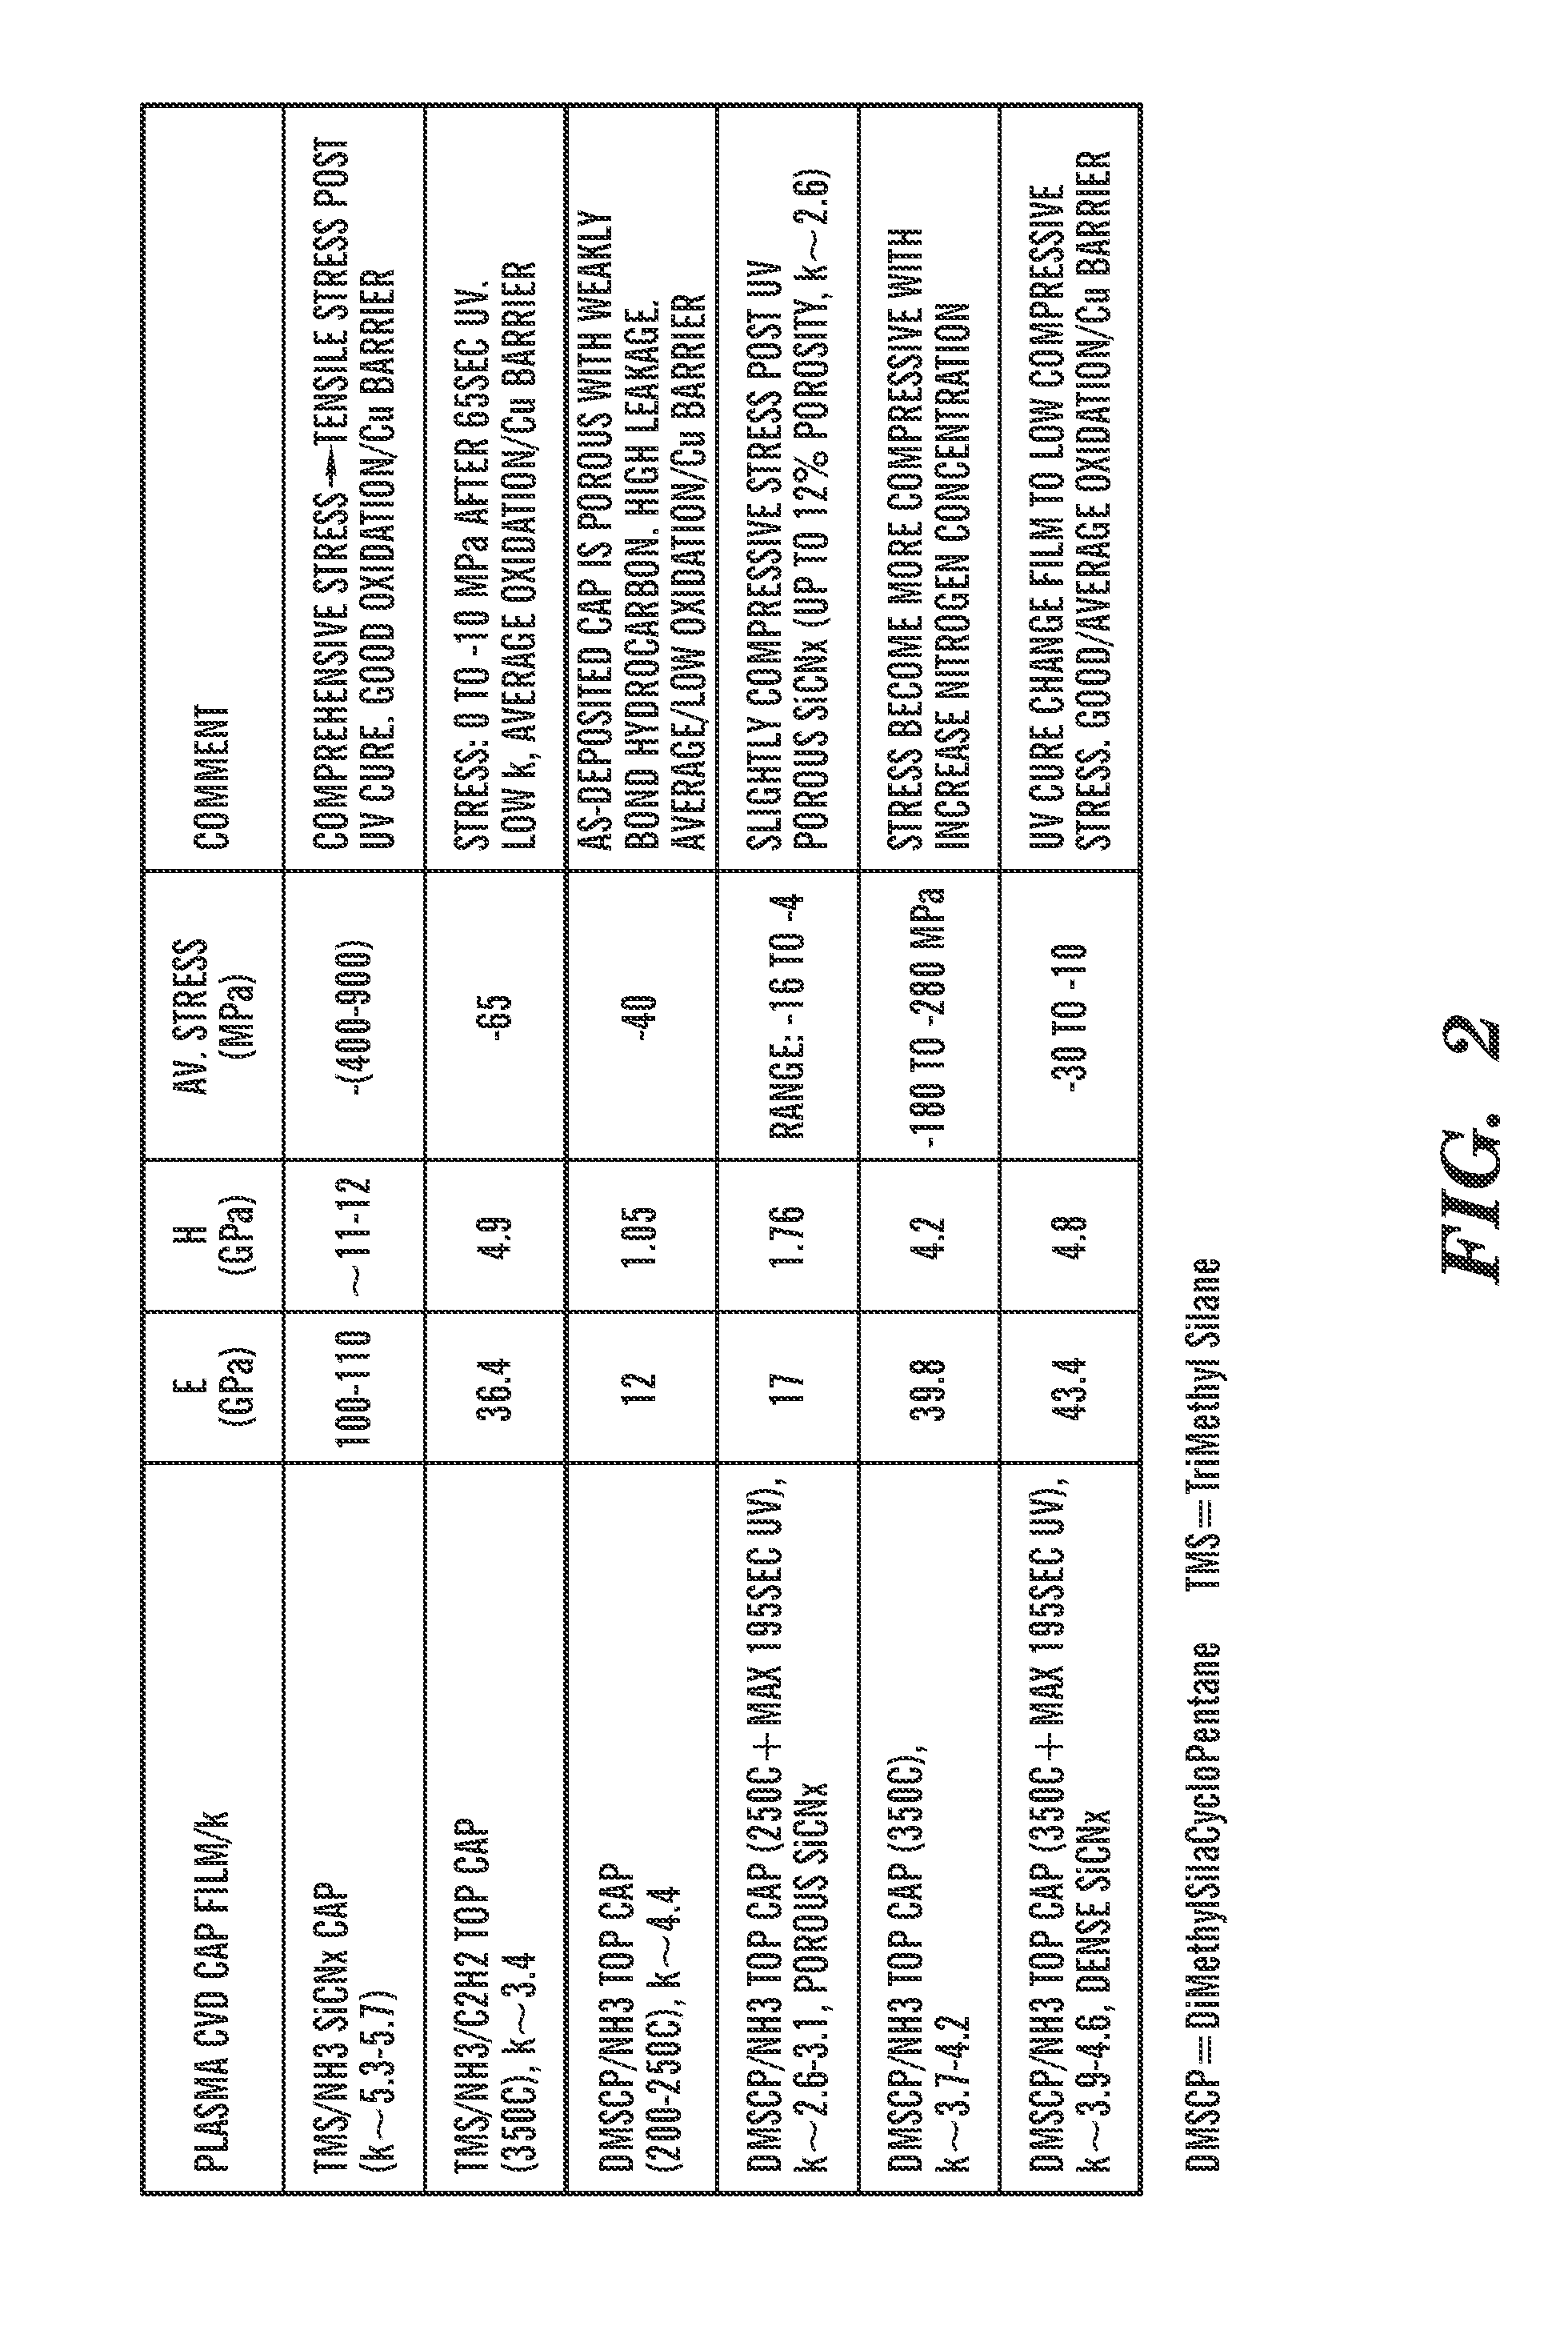 Interlevel Dielectric Stack for Interconnect Structures